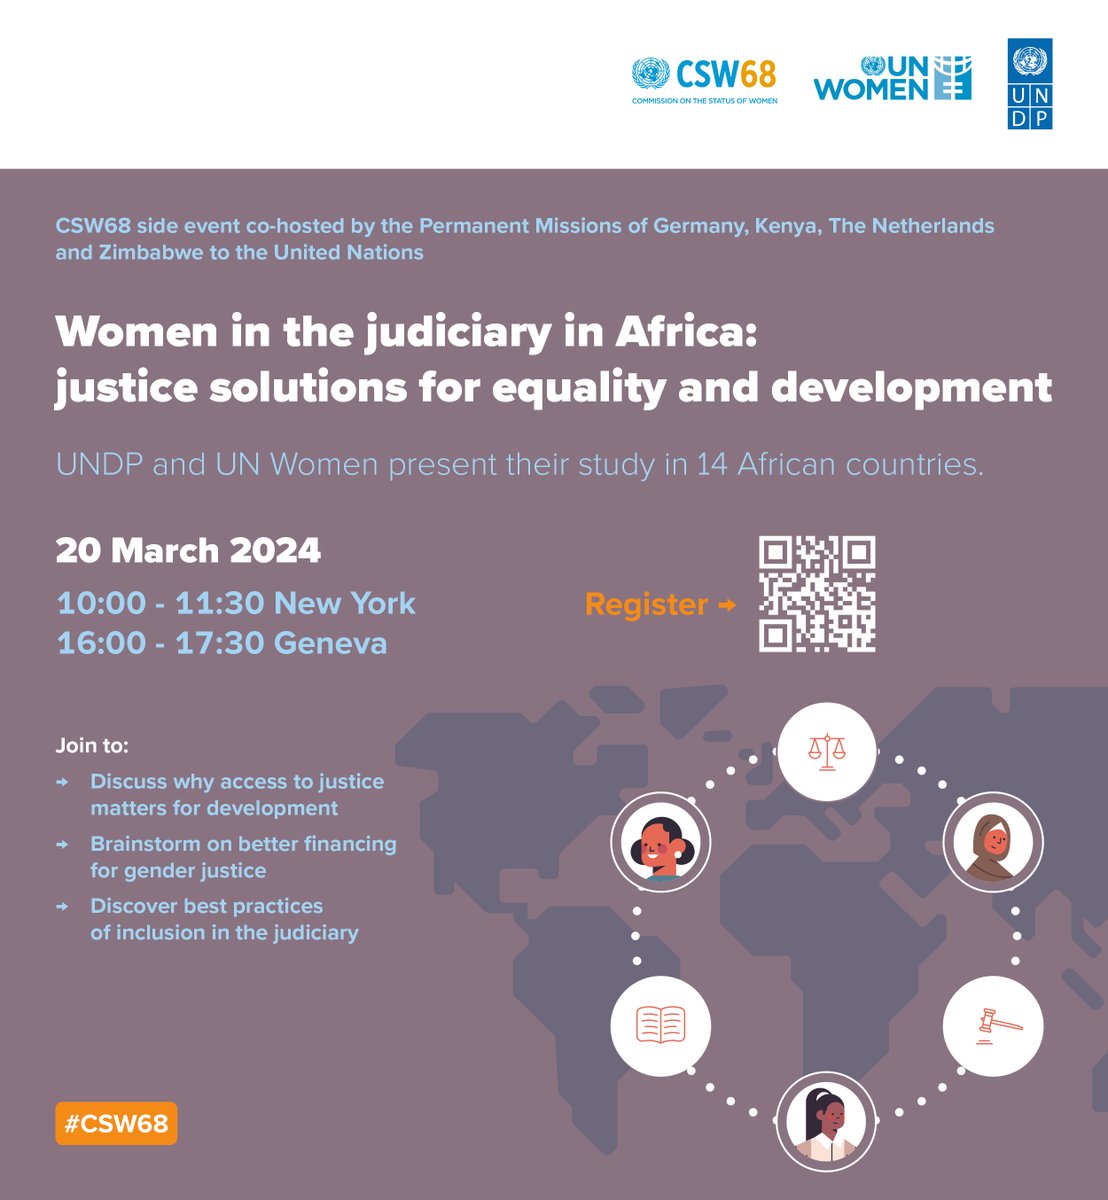 HAPPENING NOW! Women’s participation in the judiciary helps close the justice gap & improves access to justice. Today's event provides insights & practical tools to achieve & sustain progress on gender equality in justice in Africa🌍. Tune in here: tinyurl.com/3uadxcdk